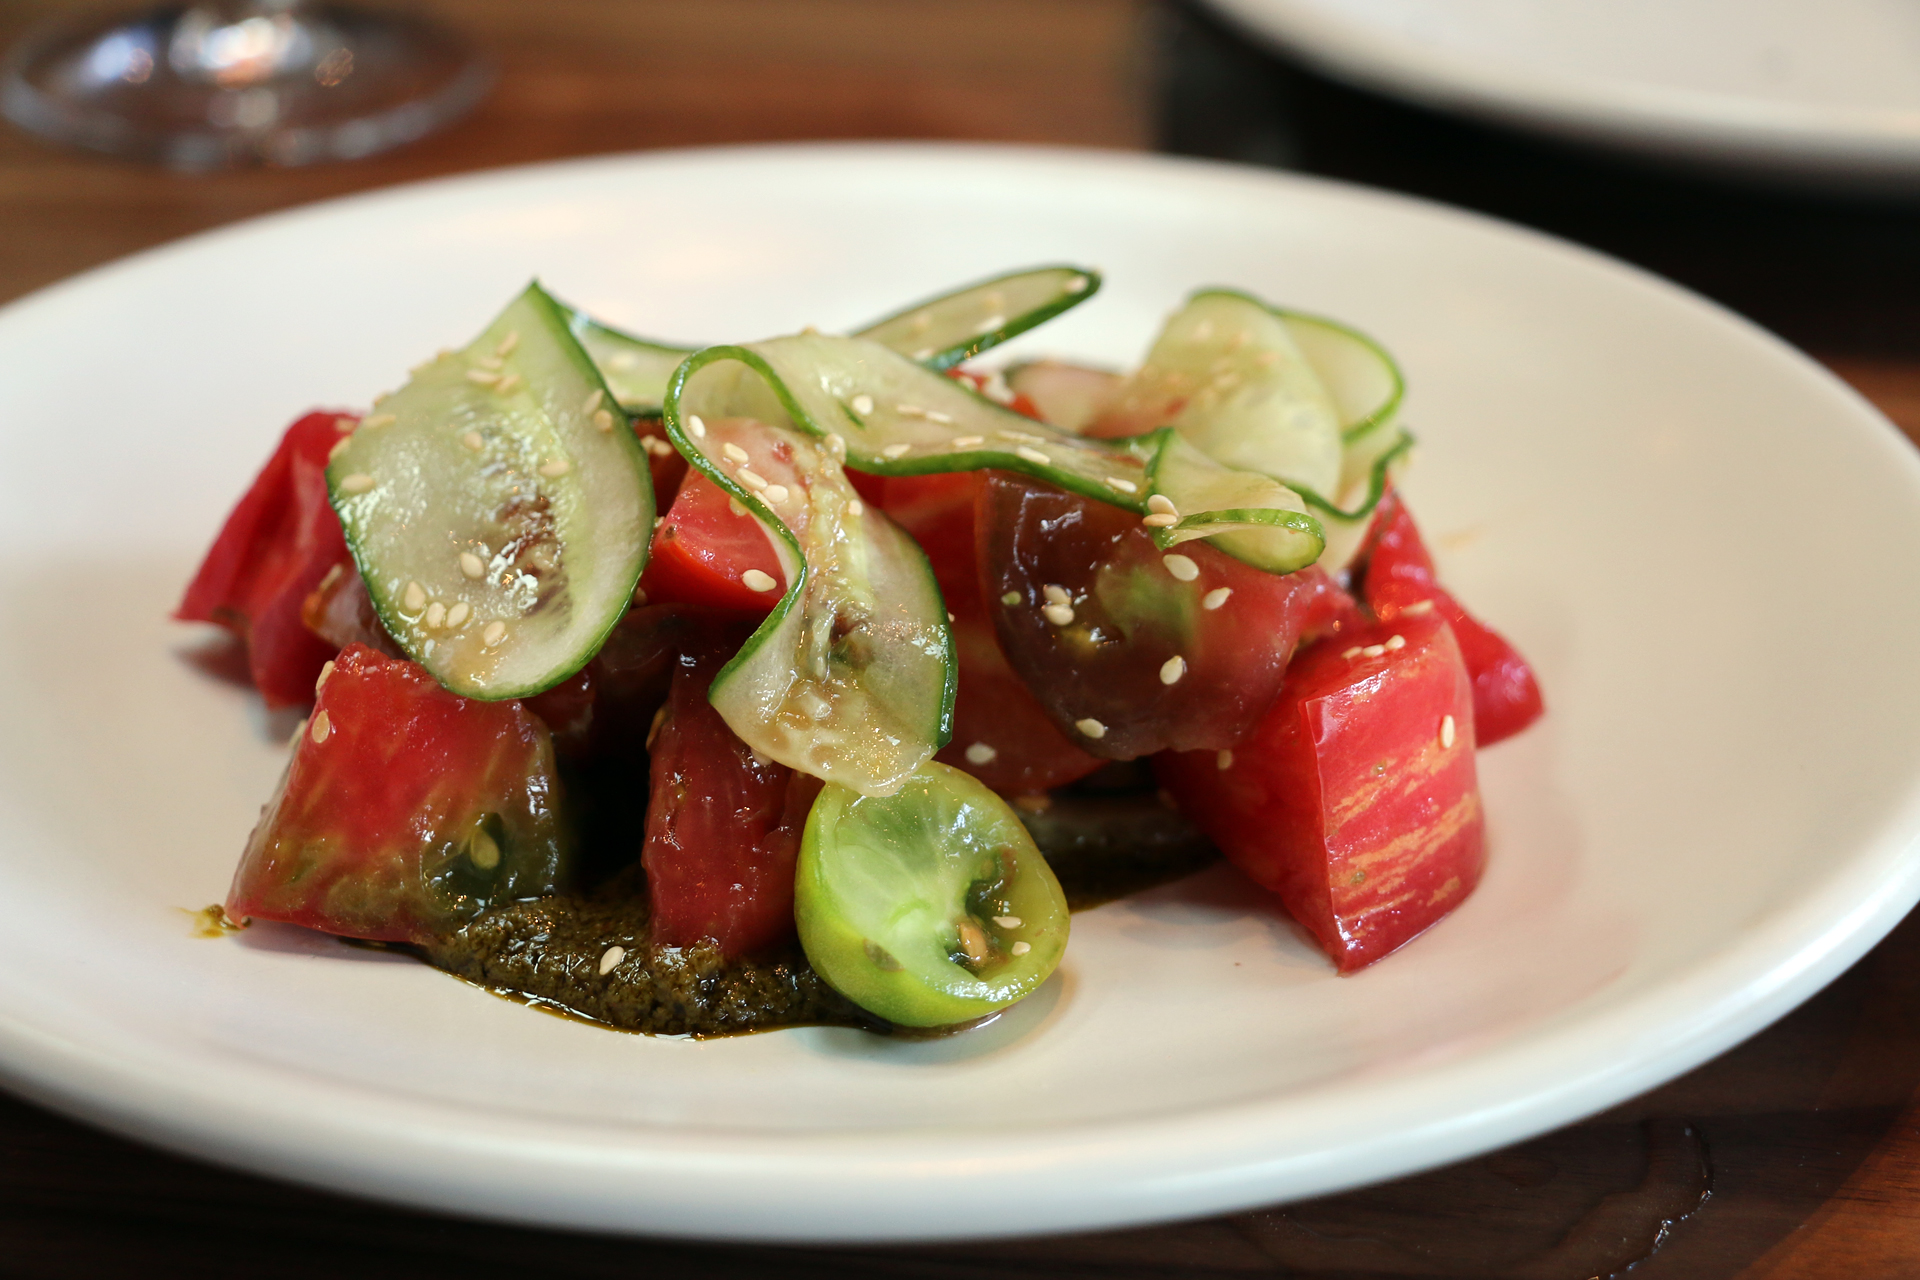 Tomato salad with anchovy-sesame sauce.